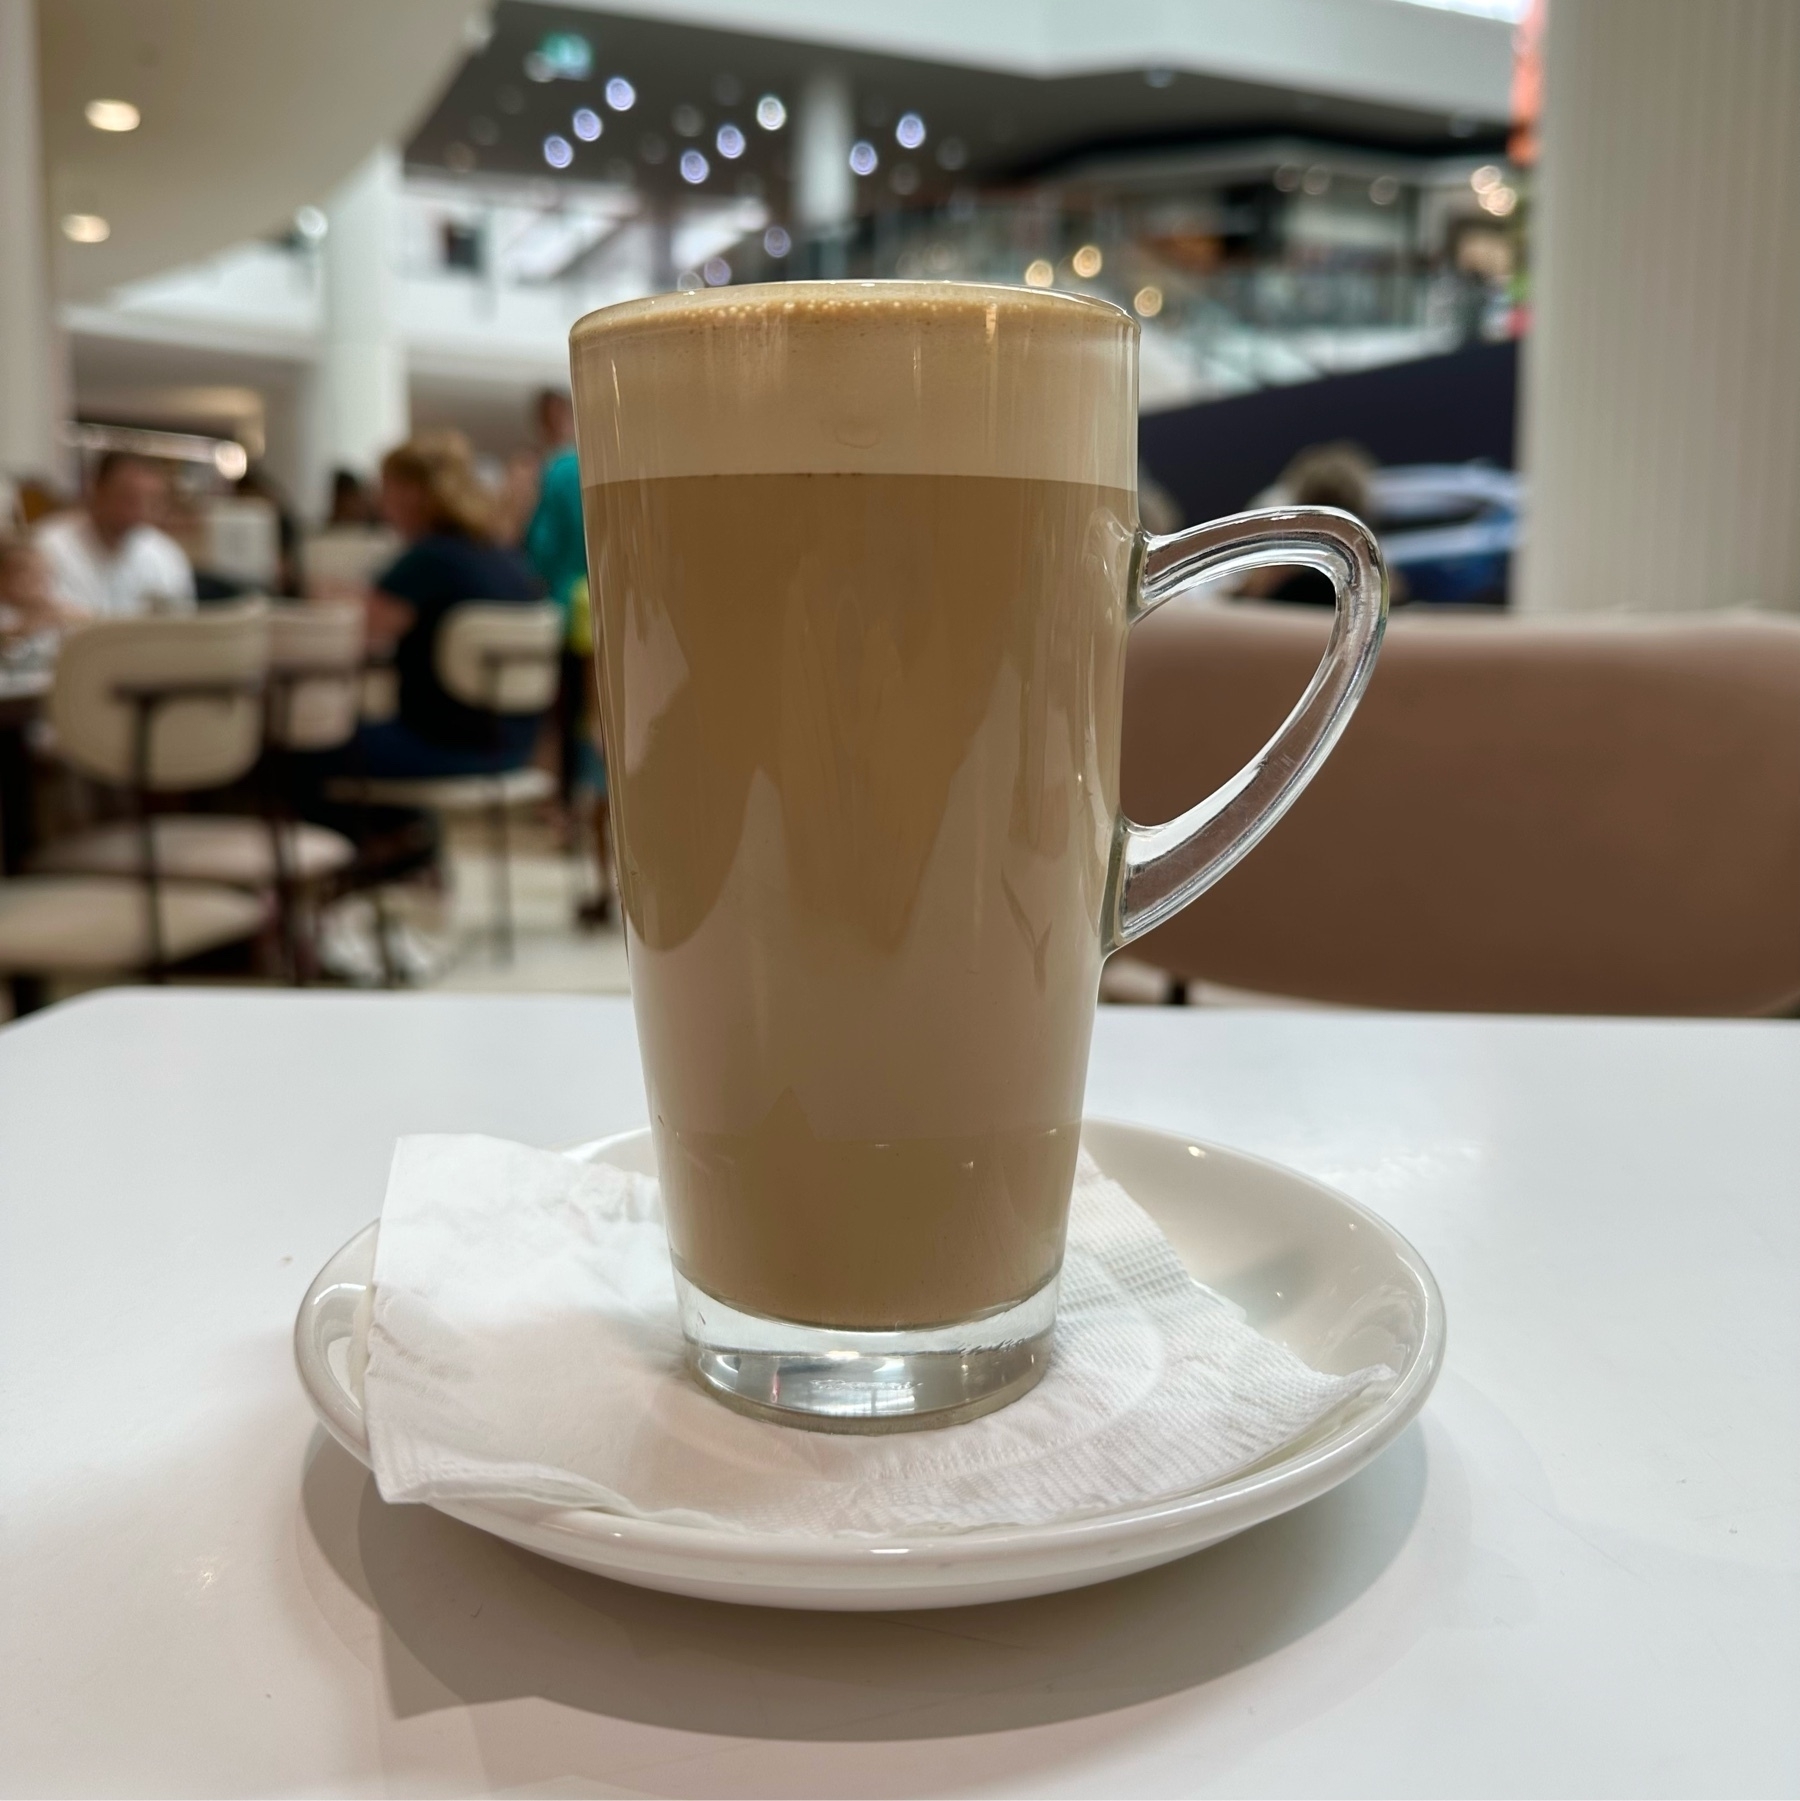 A tall thin glass with a curved glass handle towards the top of the glass. A latte is inside the glass and whiter foam is at the top.